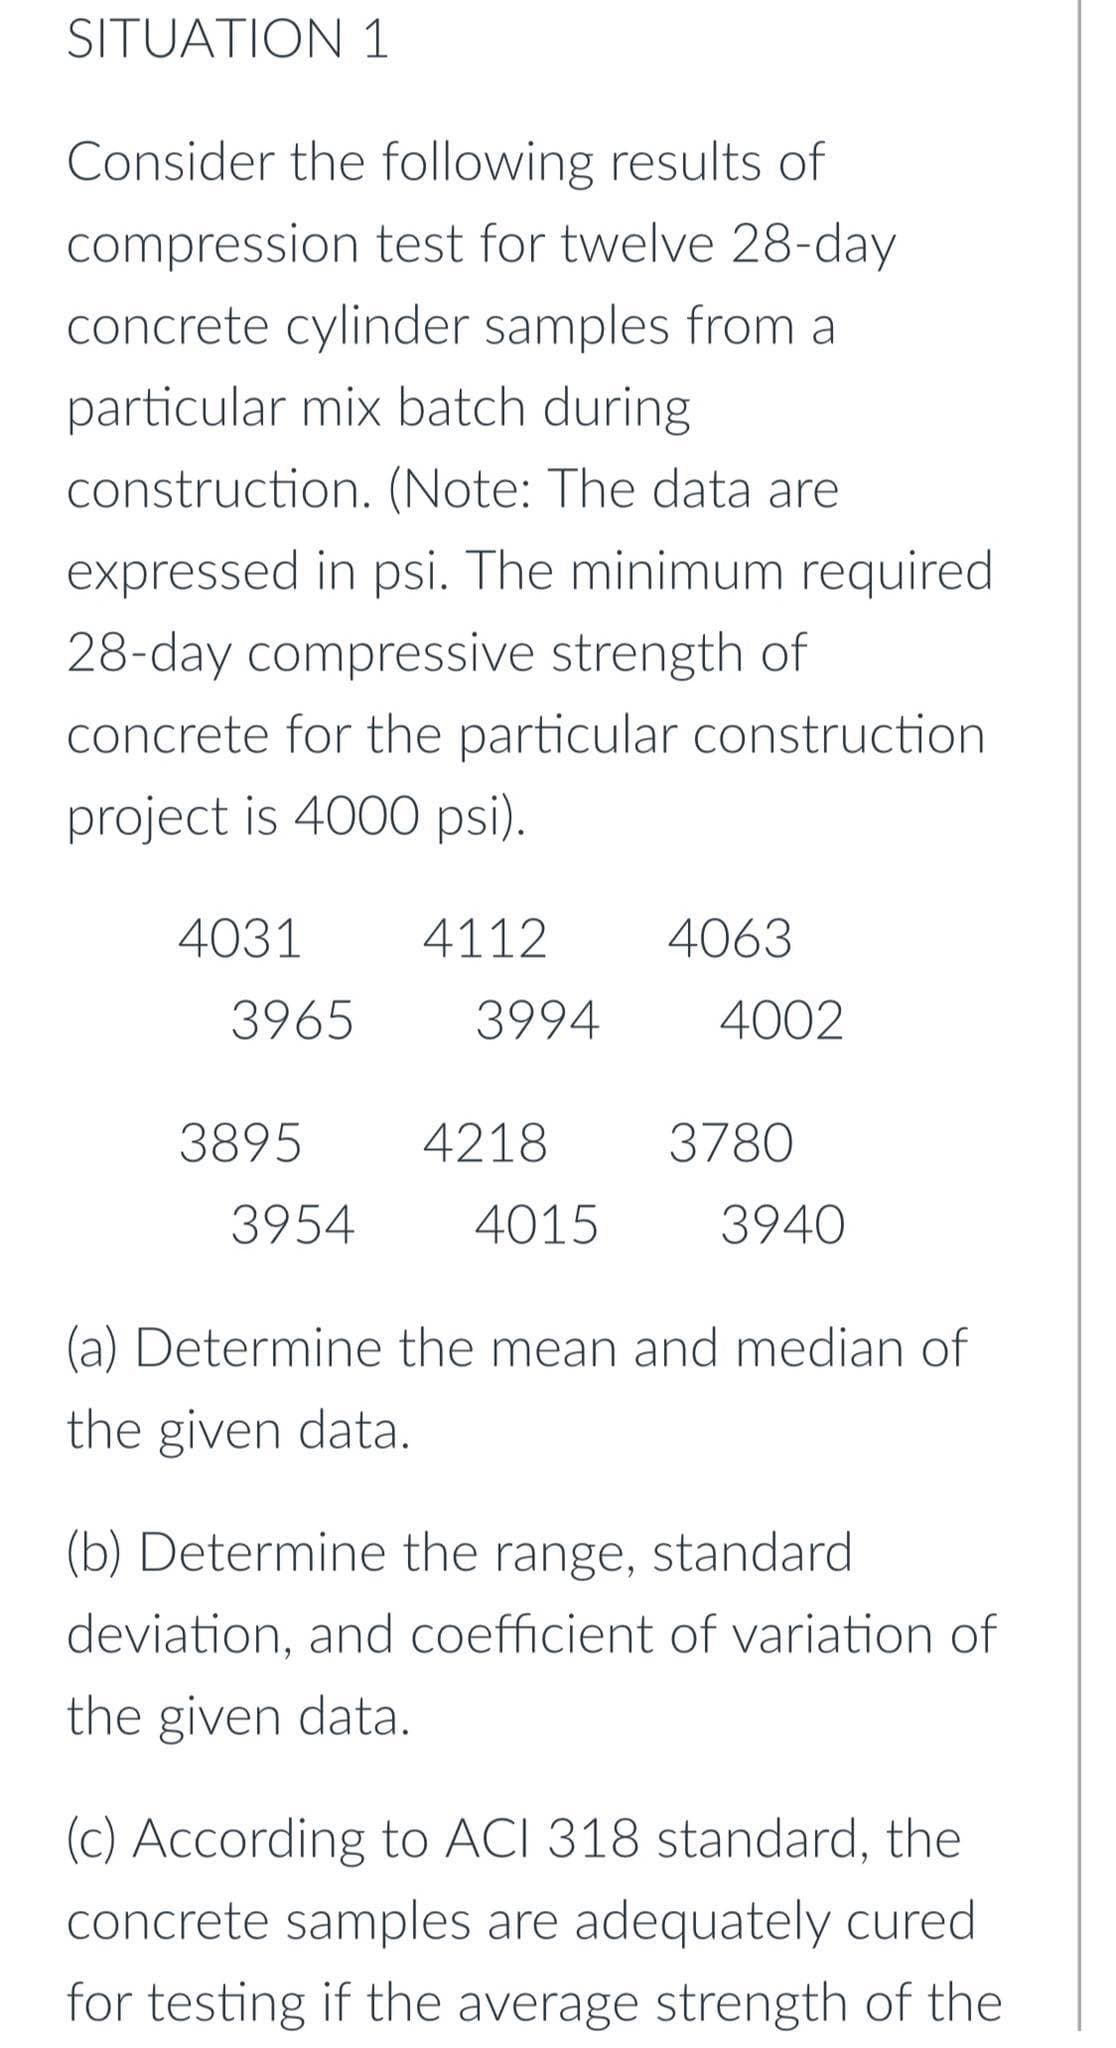 SITUATION 1
Consider the following results of
compression test for twelve 28-day
concrete cylinder samples from a
particular mix batch during
construction. (Note: The data are
expressed in psi. The minimum required
28-day compressive strength of
concrete for the particular construction
project is 4000 psi).
4031
4112
4063
3965
3994
4002
3895
4218
3780
3954
4015
3940
(a) Determine the mean and median of
the given data.
(b) Determine the range, standard
deviation, and coefficient of variation of
the given data.
(c) According to ACI 318 standard, the
concrete samples are adequately cured
for testing if the average strength of the
